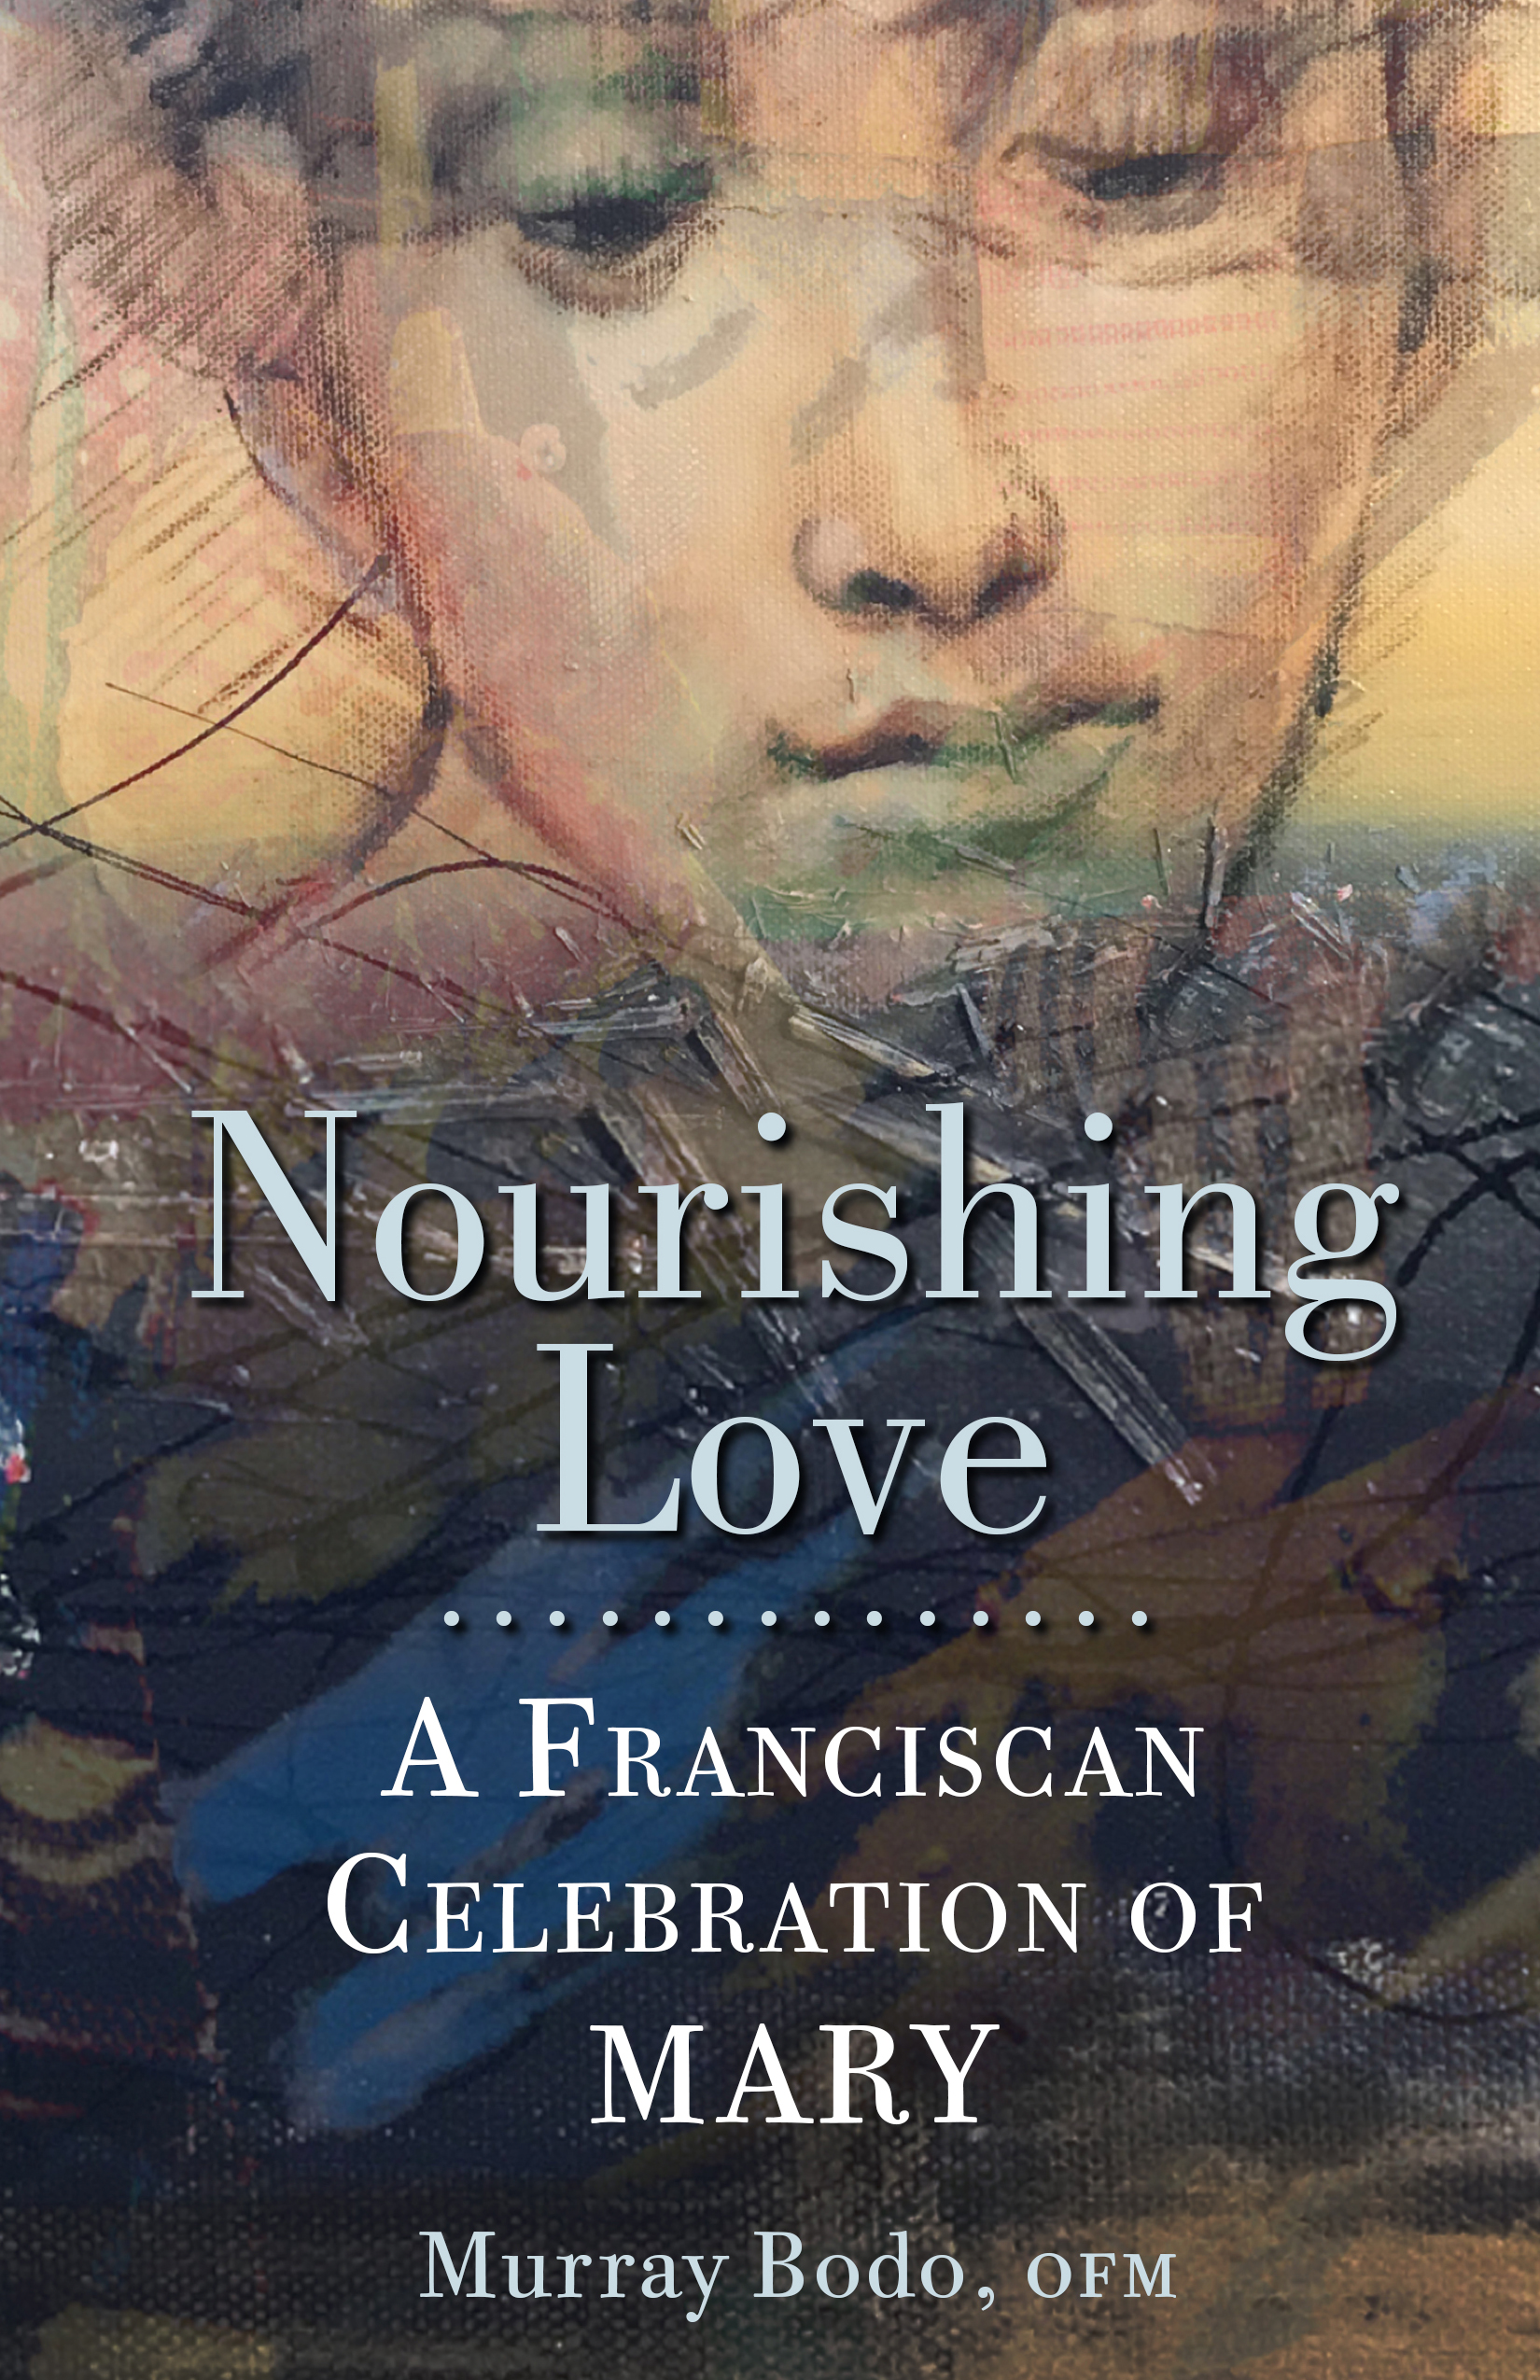 Nourishing Love  A Franciscan Celebration of Mary / Murray Bodo OFM